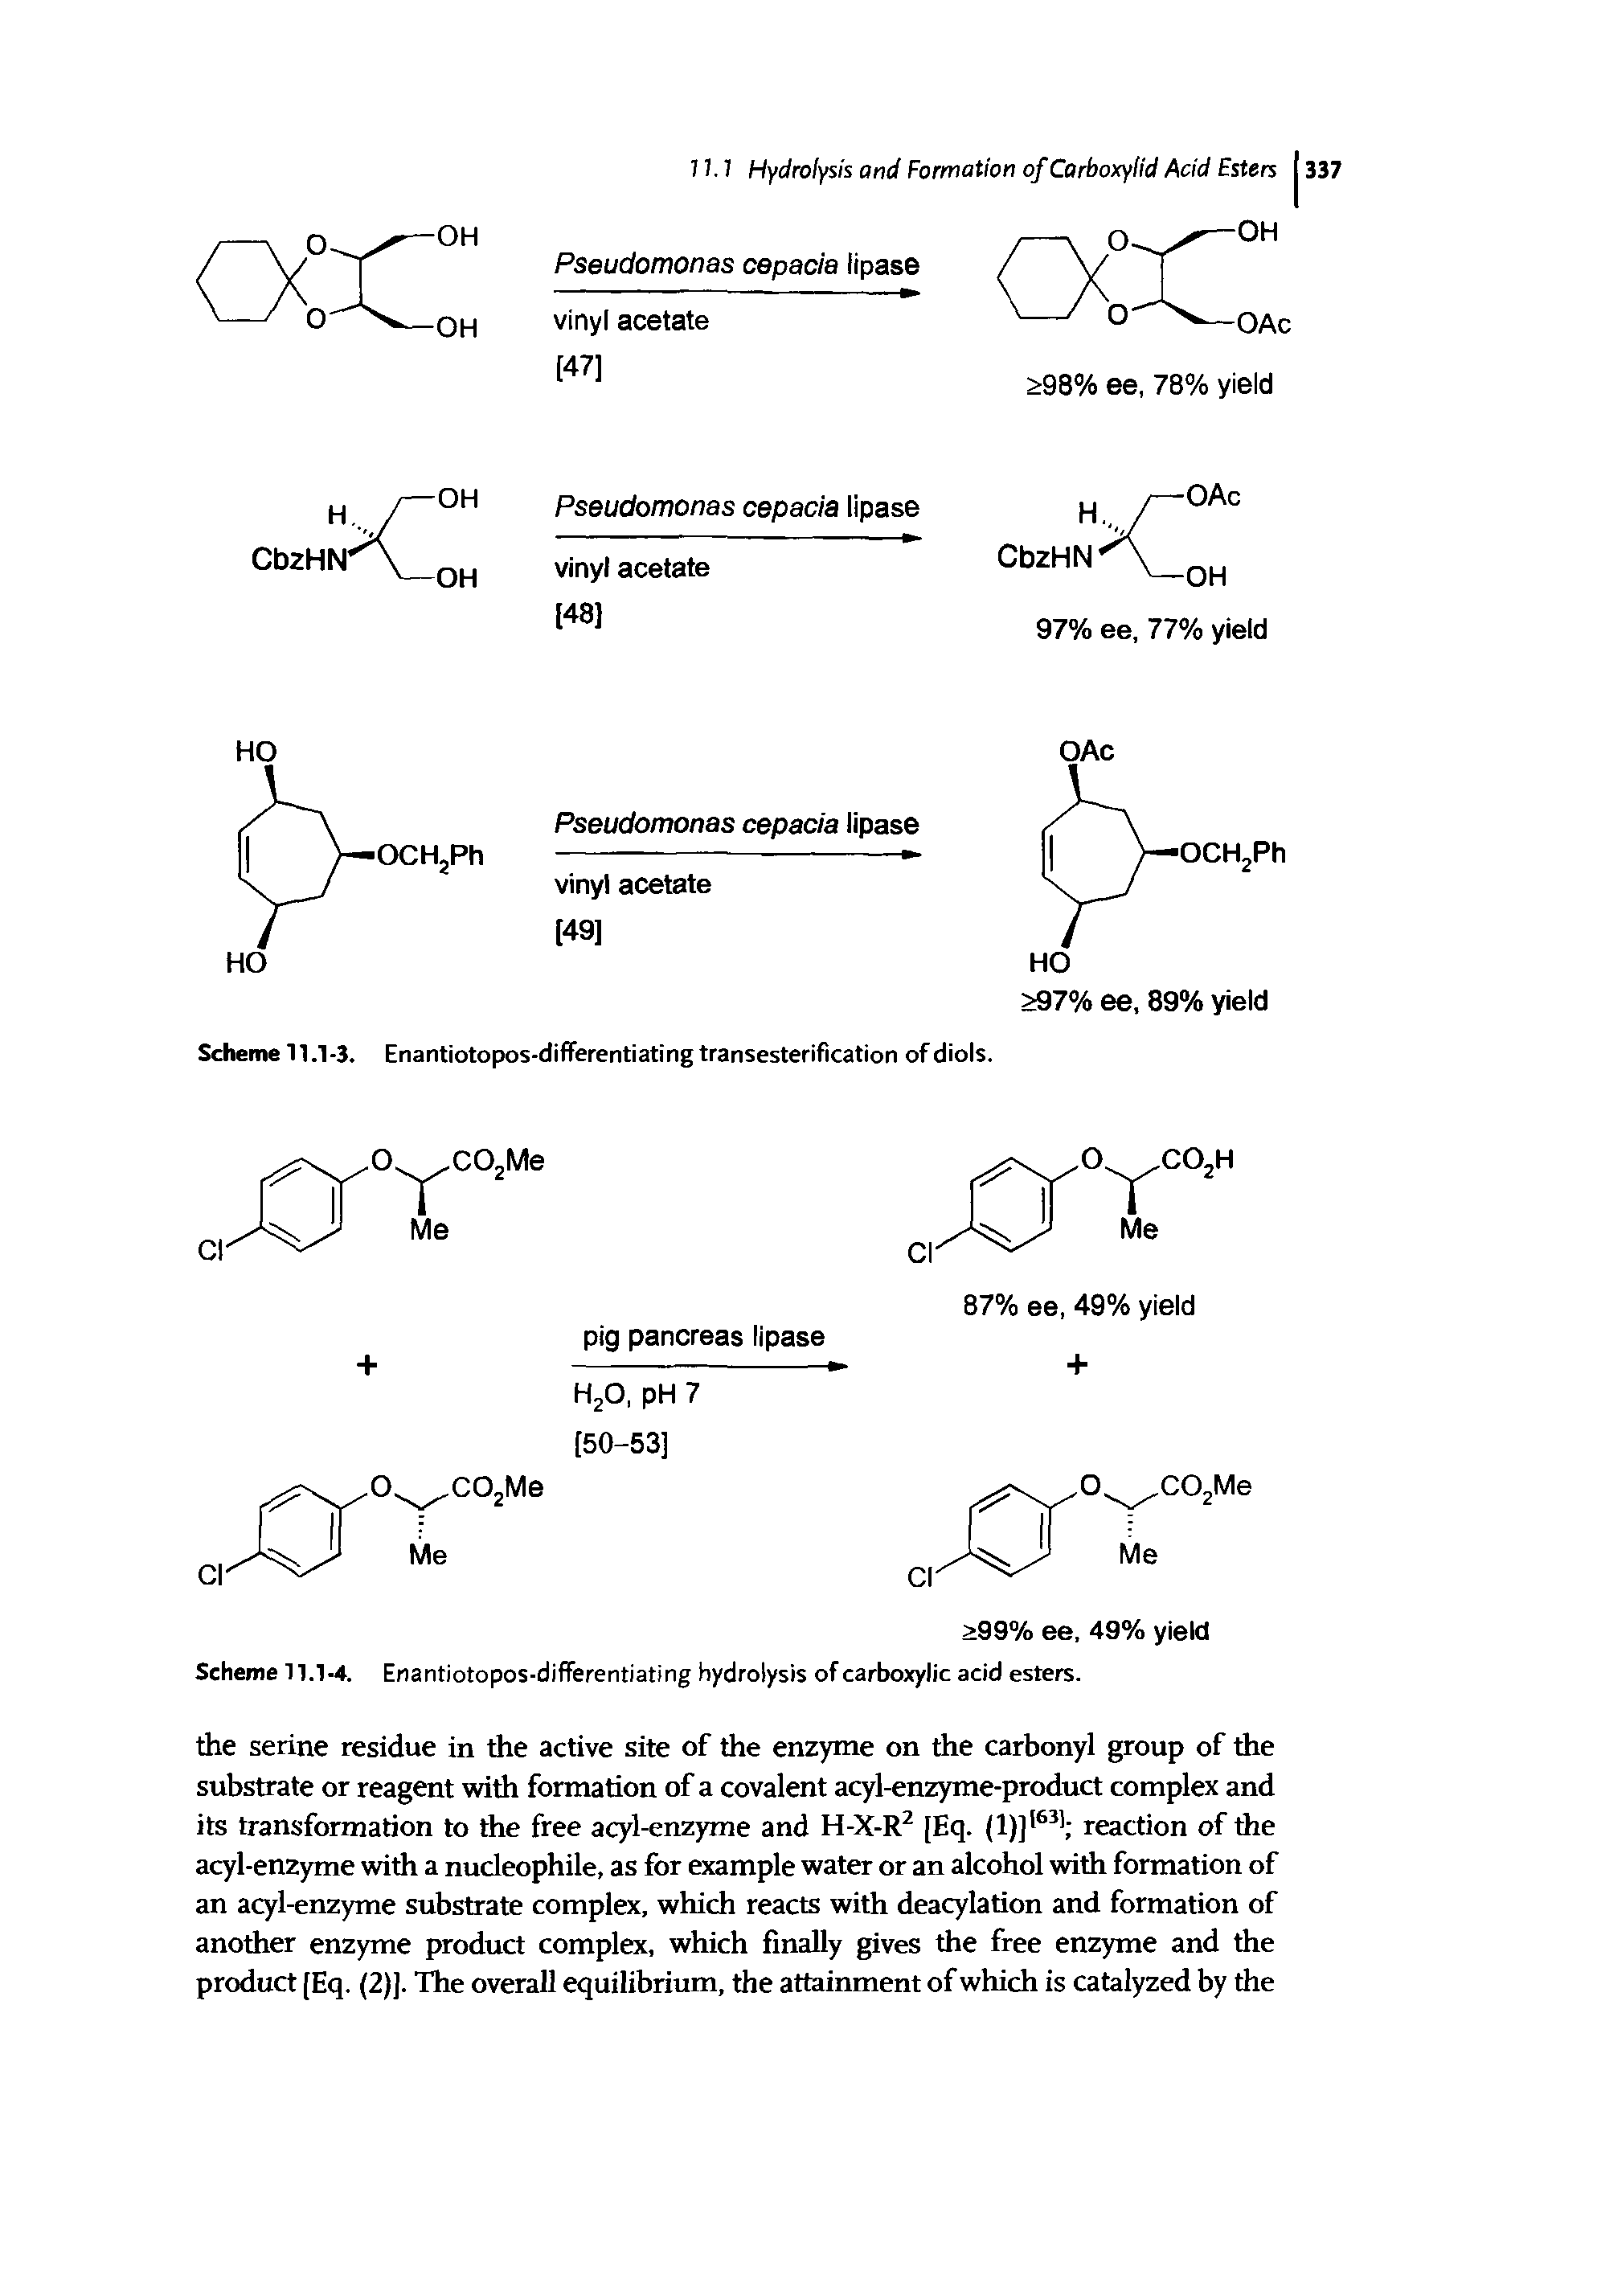 Scheme 11.1-4. Enantiotopos-differentiating hydrolysis of carboxylic acid esters.